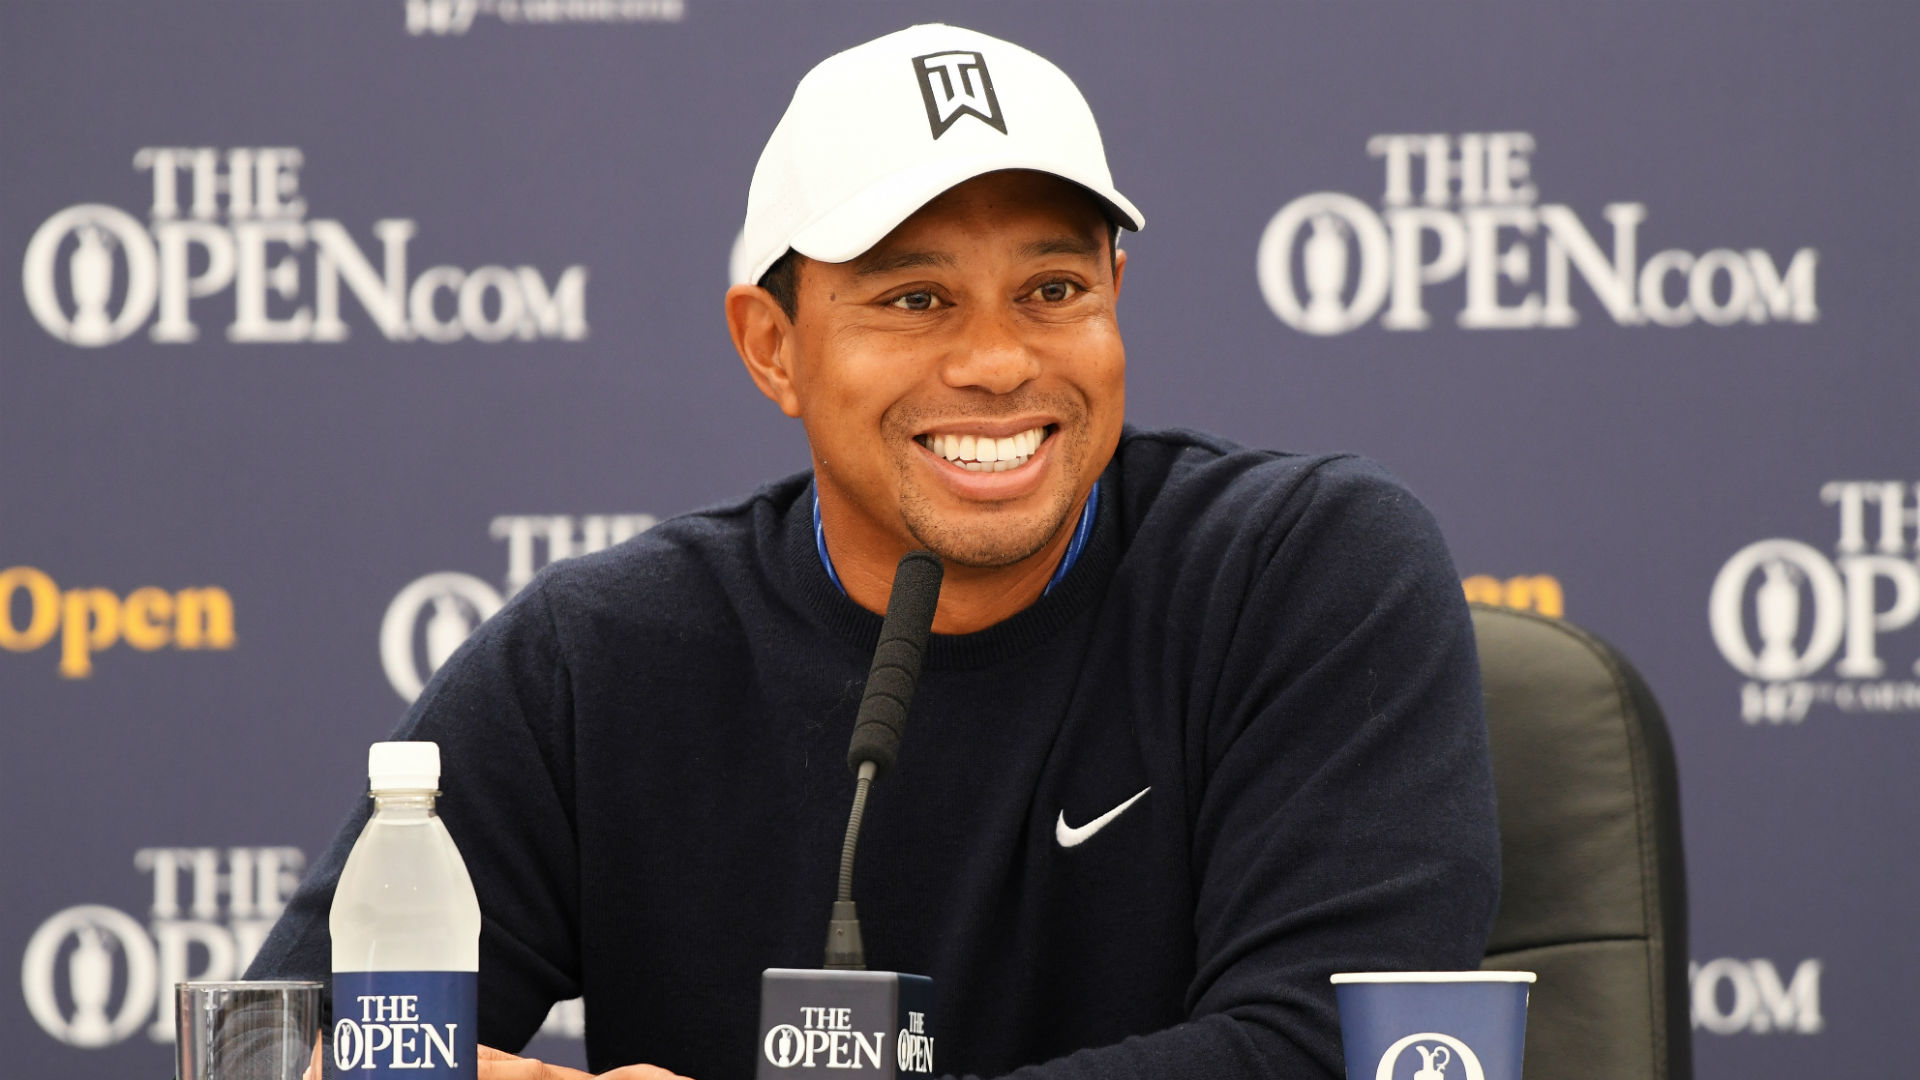 British Open is his best chance of winning another major, Woods says